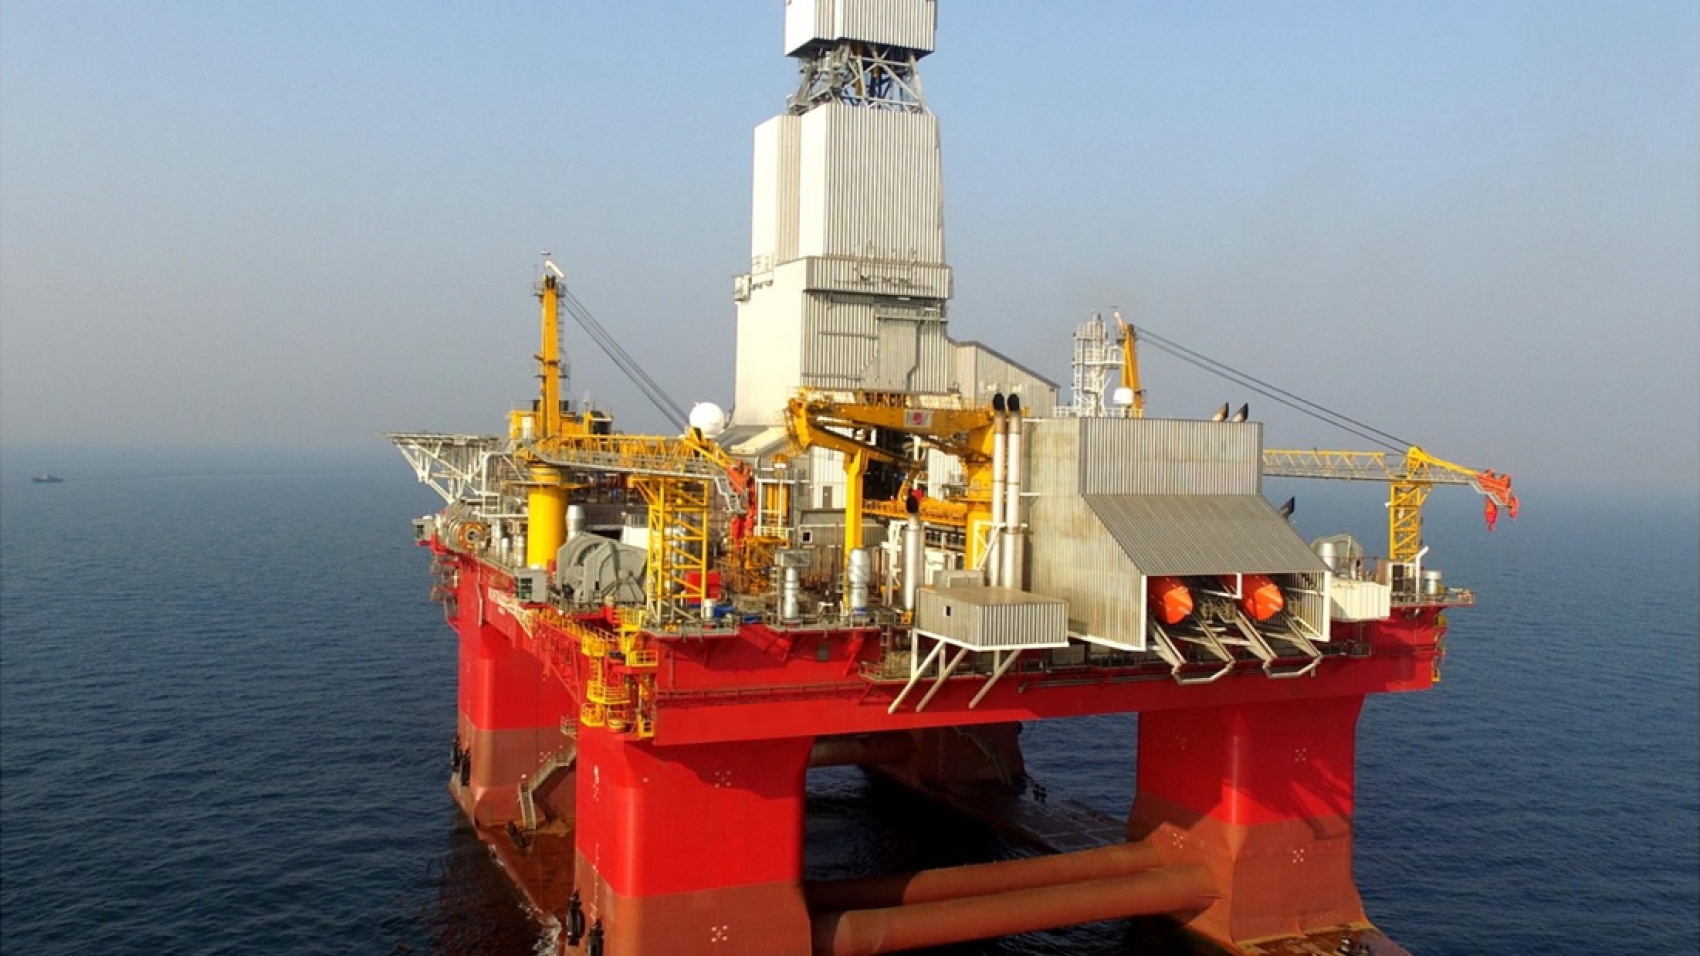 2000 HP Oil Rig for Sale - Oil & Gas Drill Rigs - Rig Source